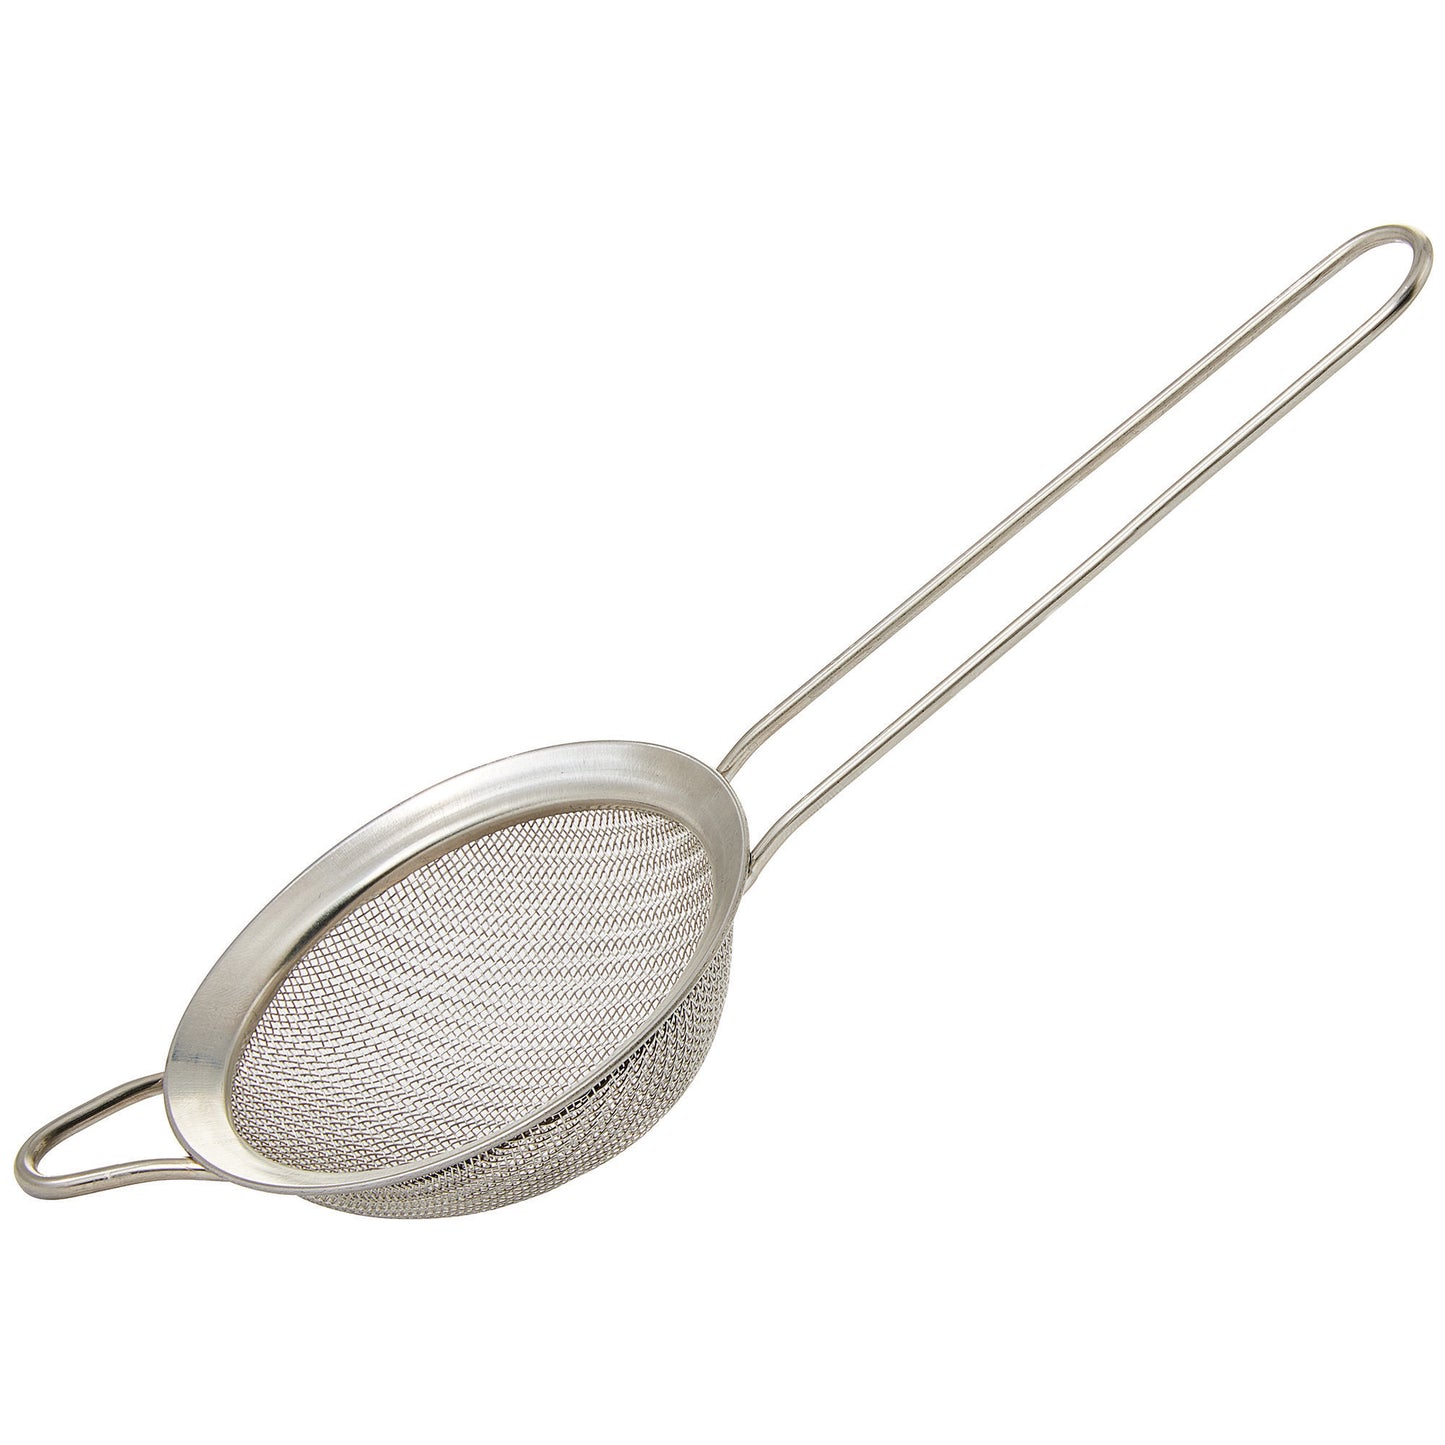 MS2K-3S - Cocktail/Powdered Sugar Strainer/Sifter